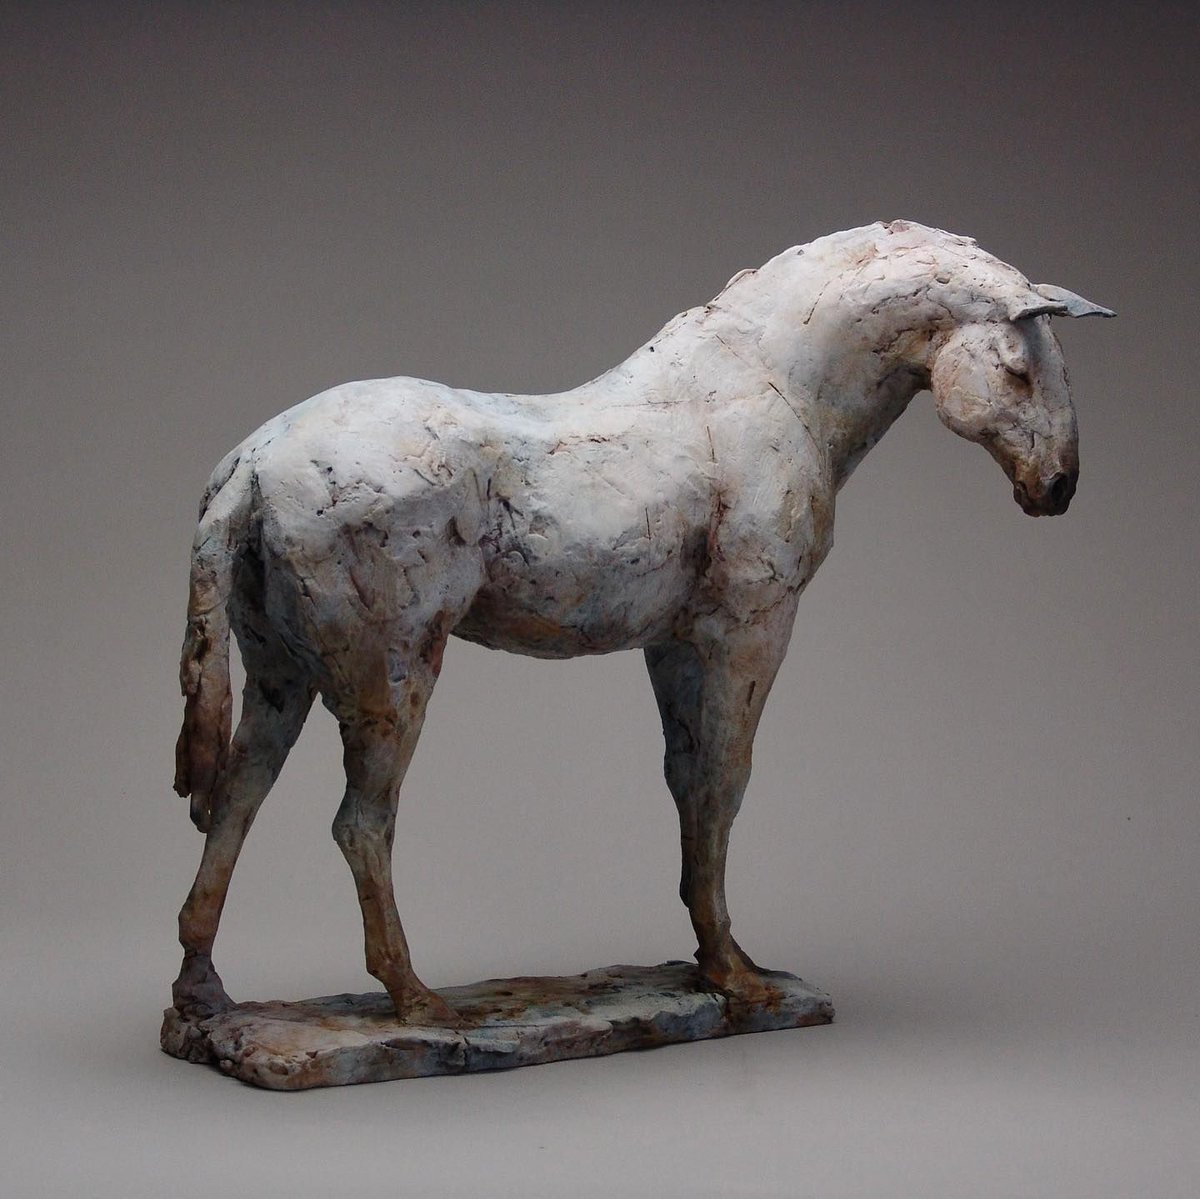 ‘Resting with Ancients’ is a Bronze edition of 12 sculptures by @nicholatheakstonsculpture - is this lovely?!

#beautifulbizarre #nicholatheakstonsculpture #femalesculptor #animalartist #bronzesculpture #sculptor #equineart #animalsculpture #horses